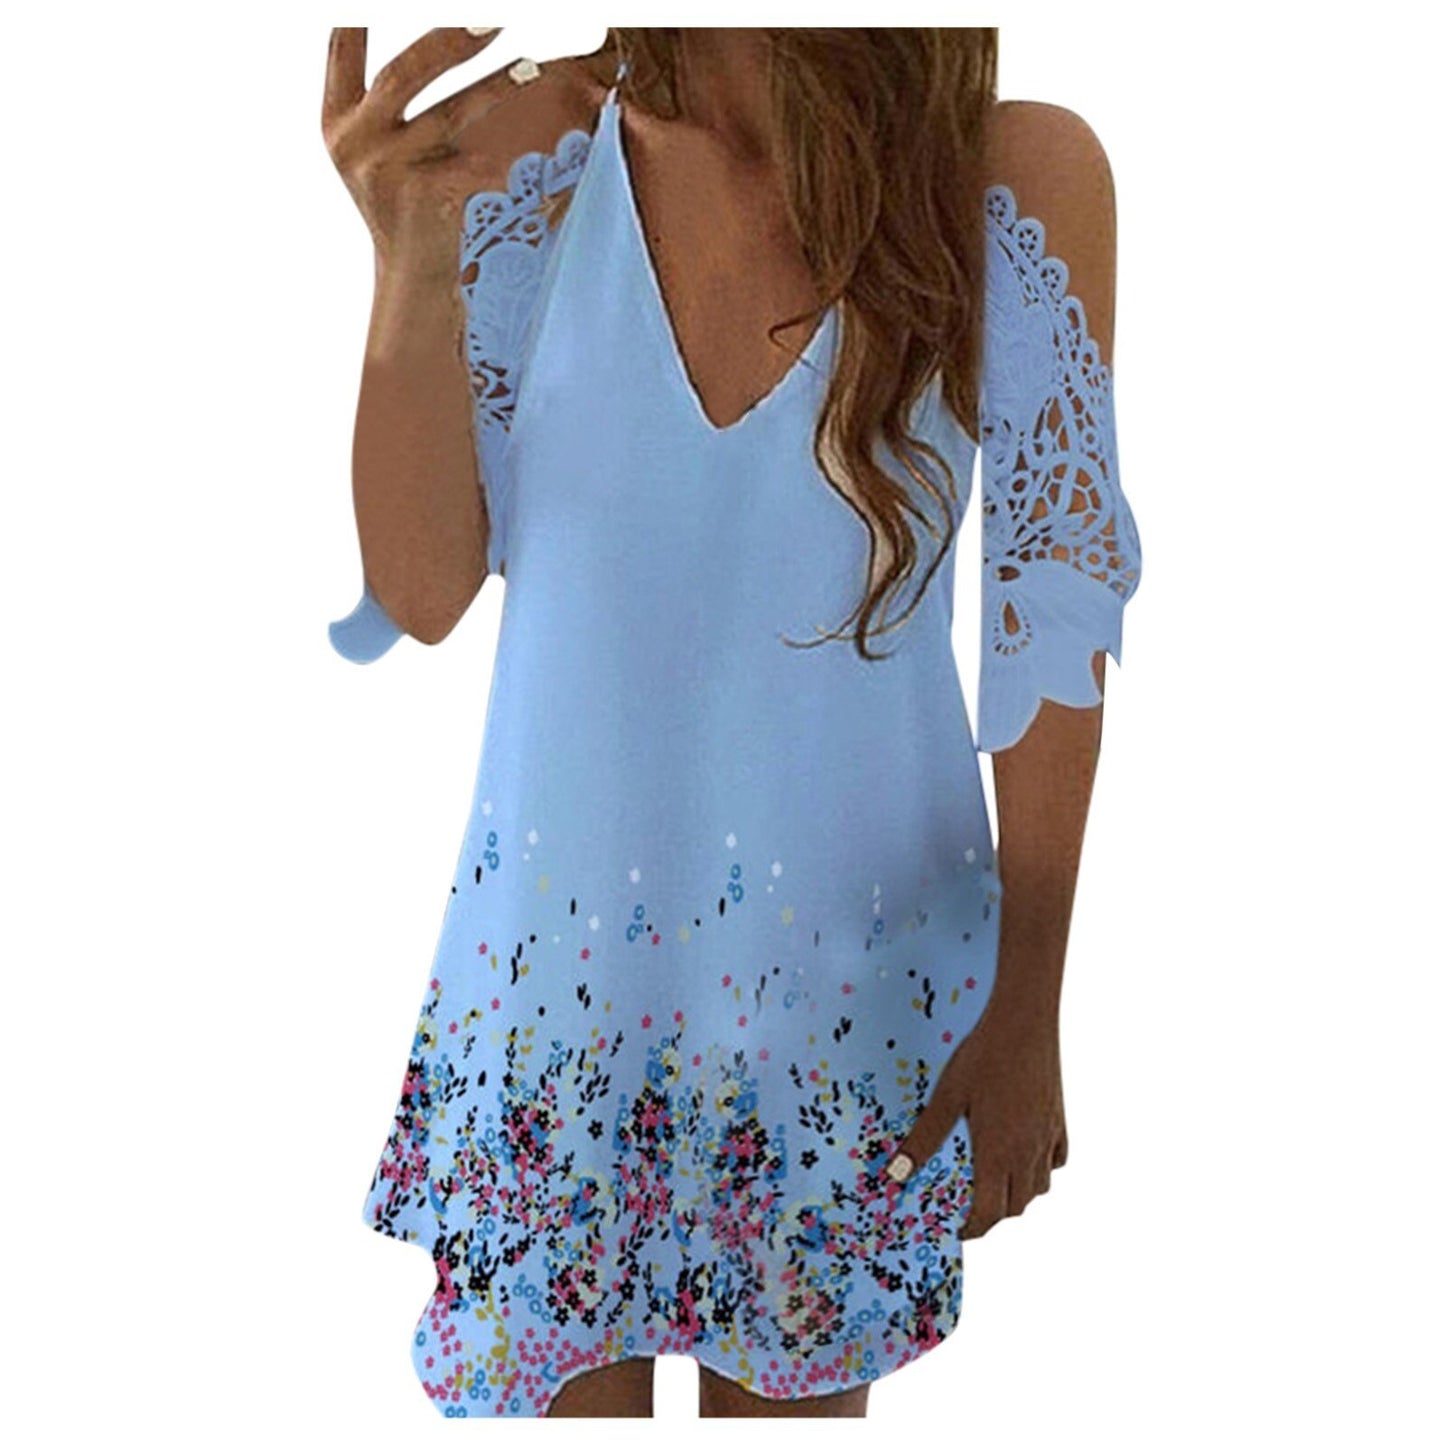 Women Causal Off Shoulder Midi Dress Half Sleeves Print Floral 2020 Summer Feminine Oversize Lace Clothes Sling Party Dresses 13